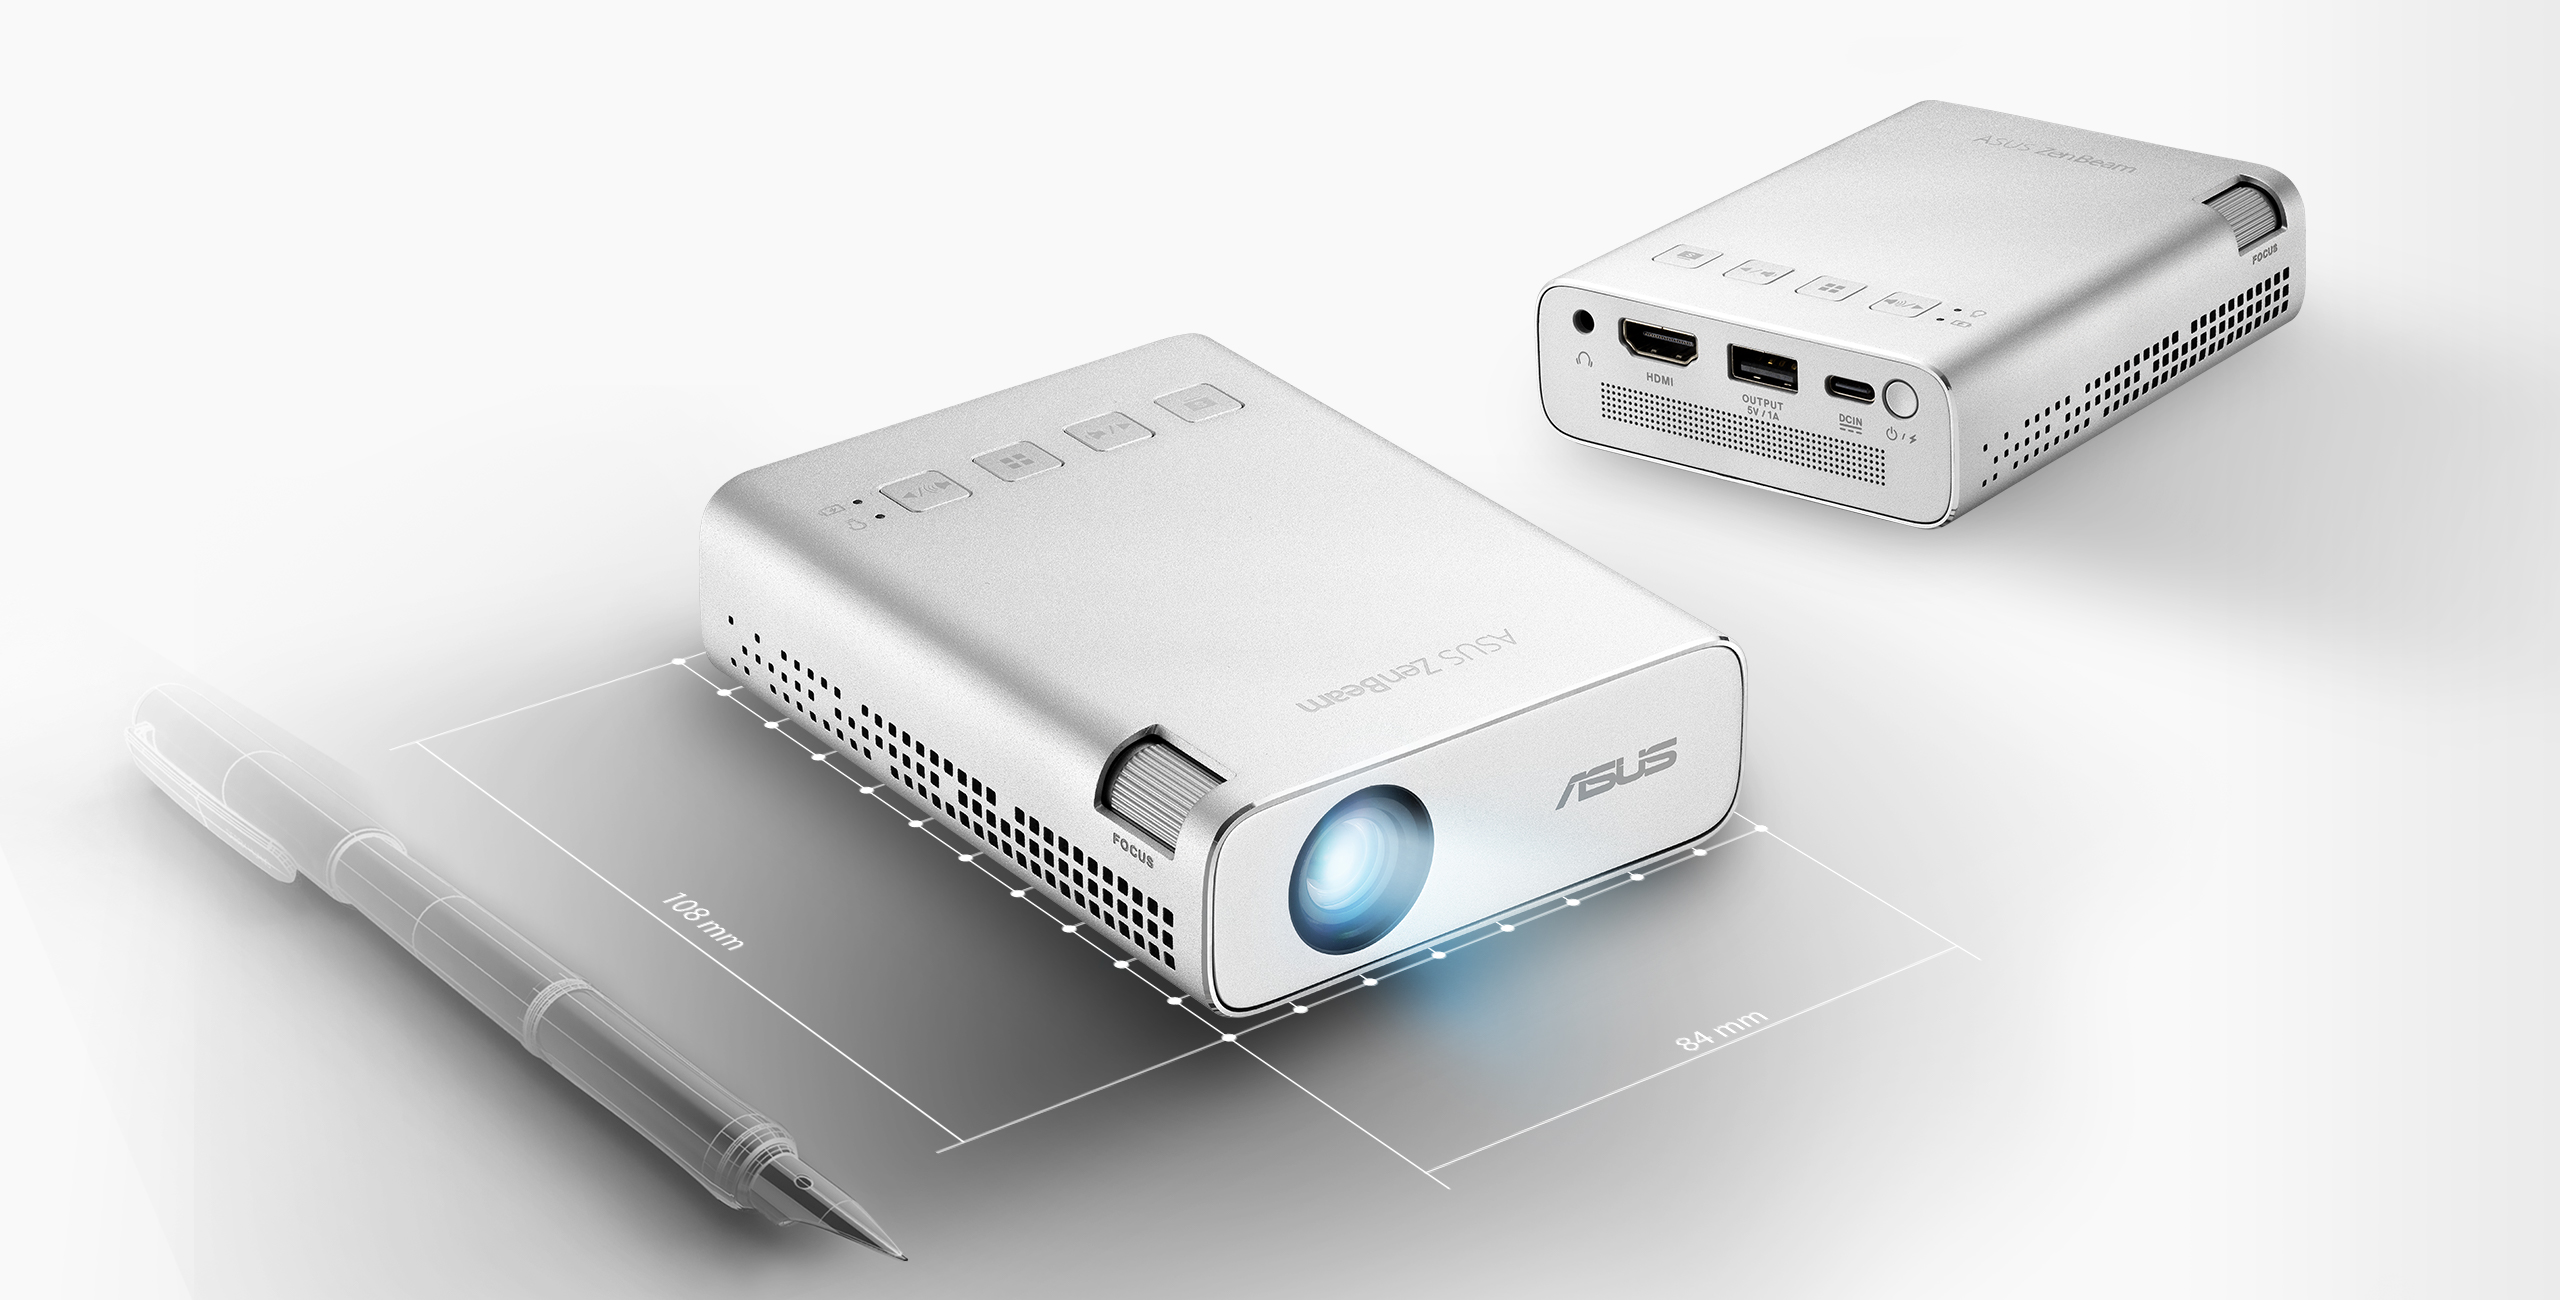 ZenBeam E1R supports wireless mirroring from Android, iOS and Windows 10 or above devices or wired HDMI connection